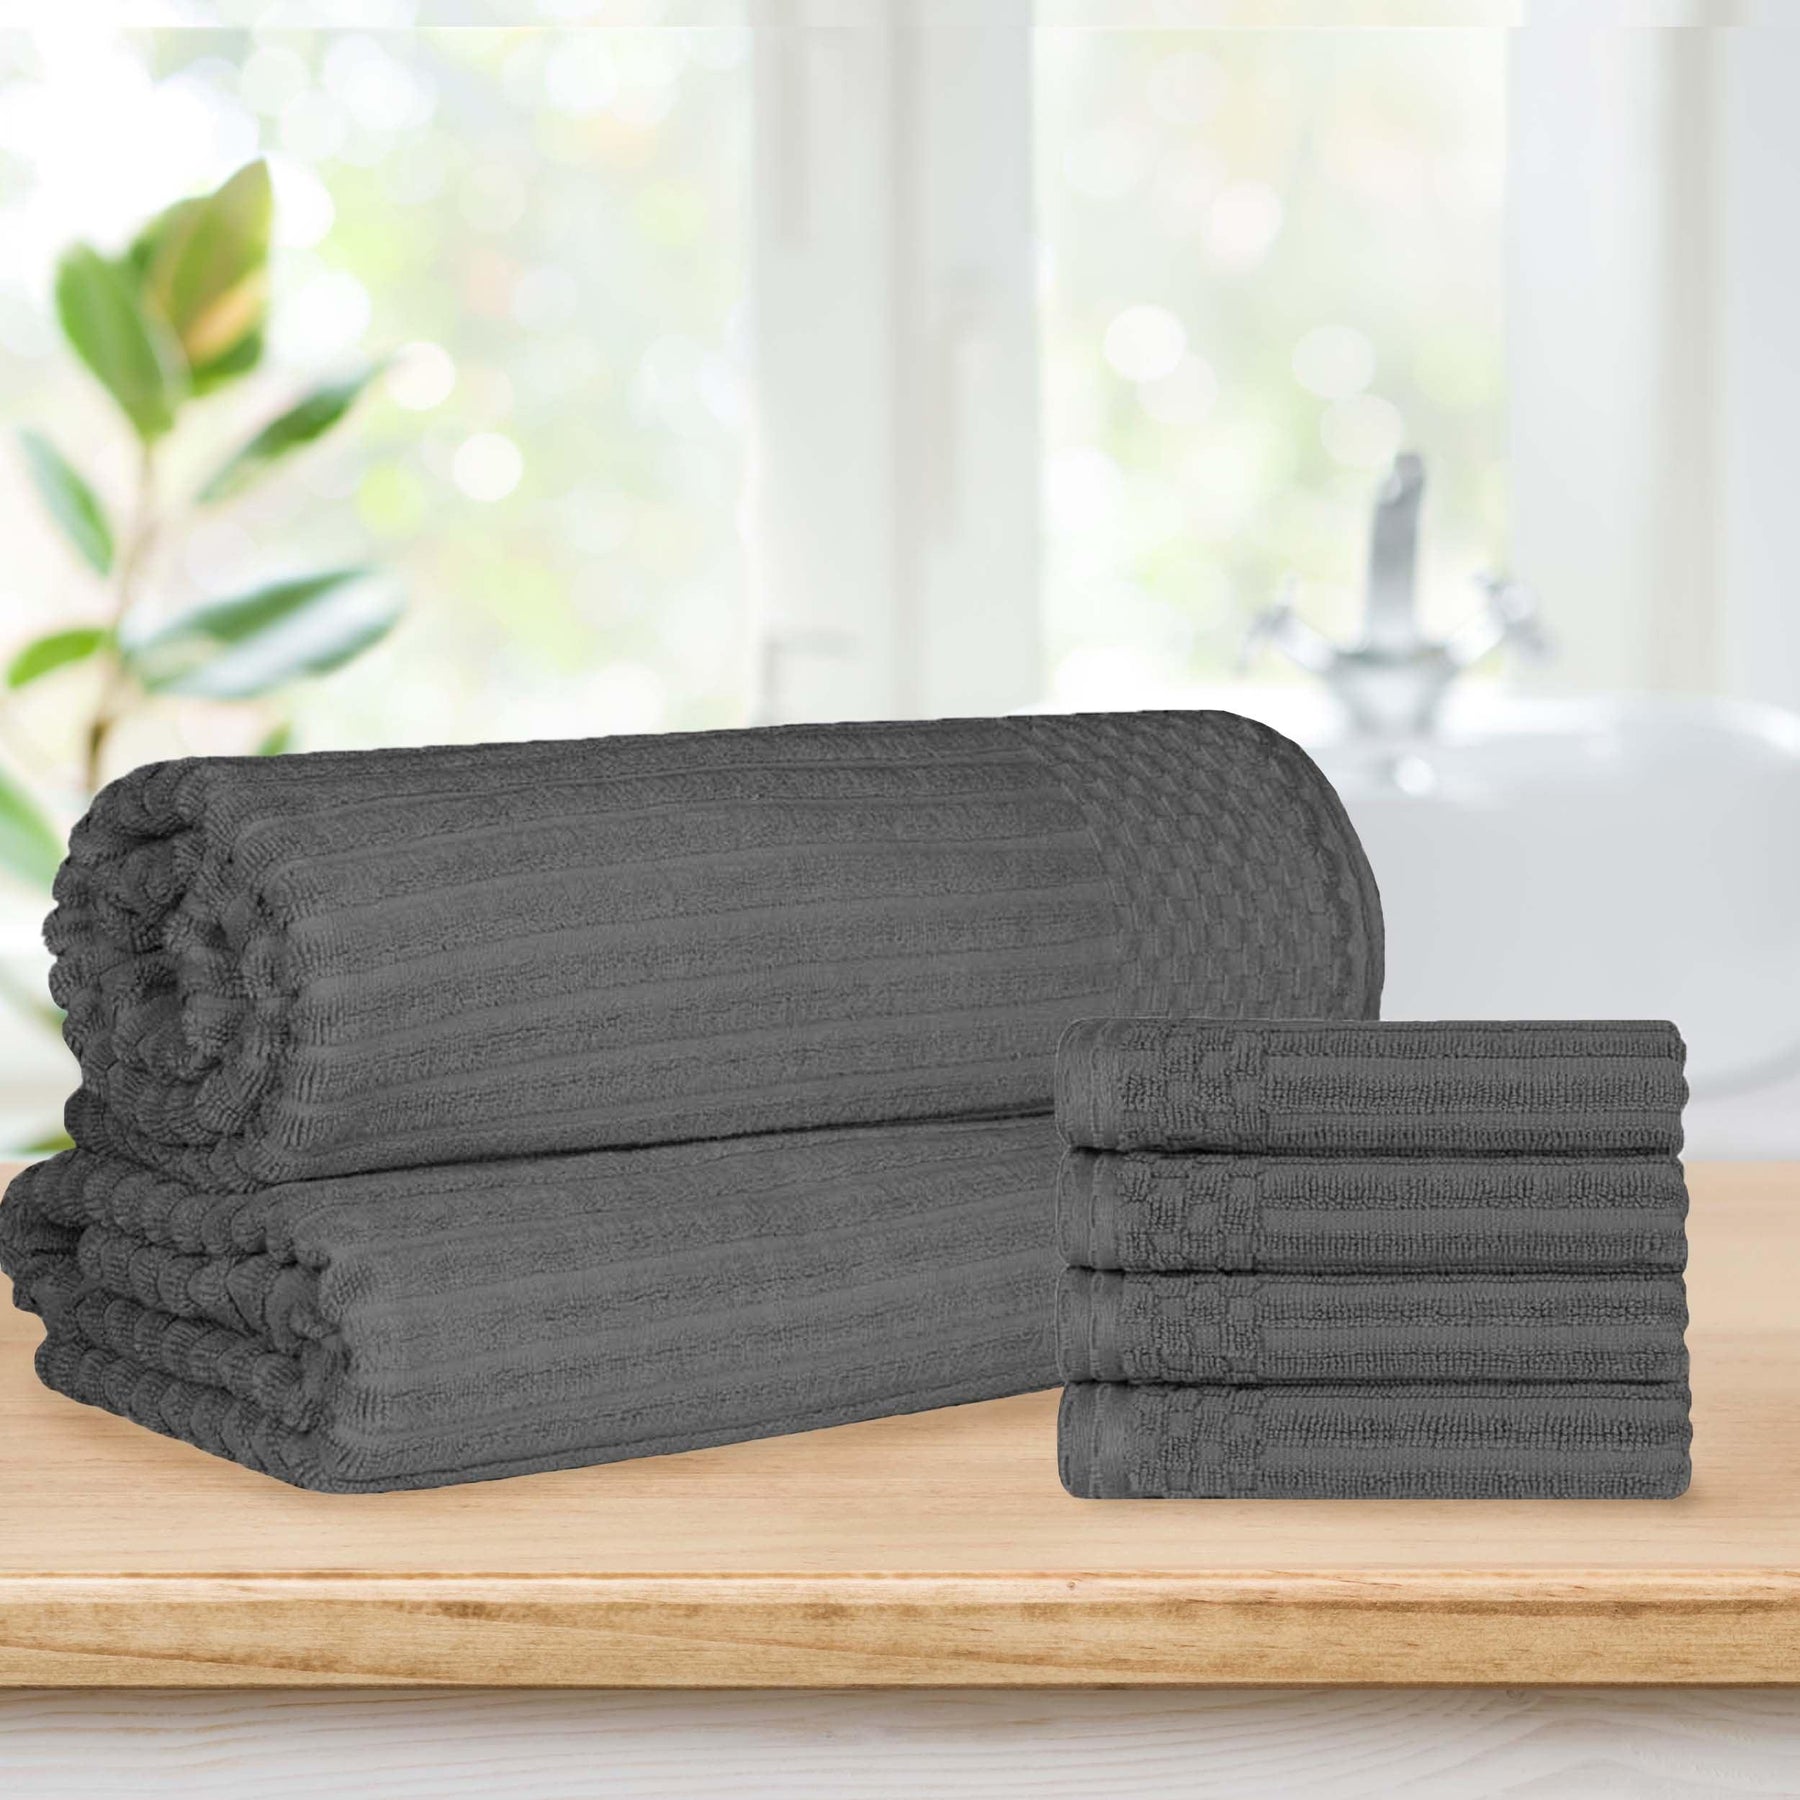 Superior Soho Ribbed Textured Cotton Ultra-Absorbent Hand Towel and Bath Sheet Set - Charcoal